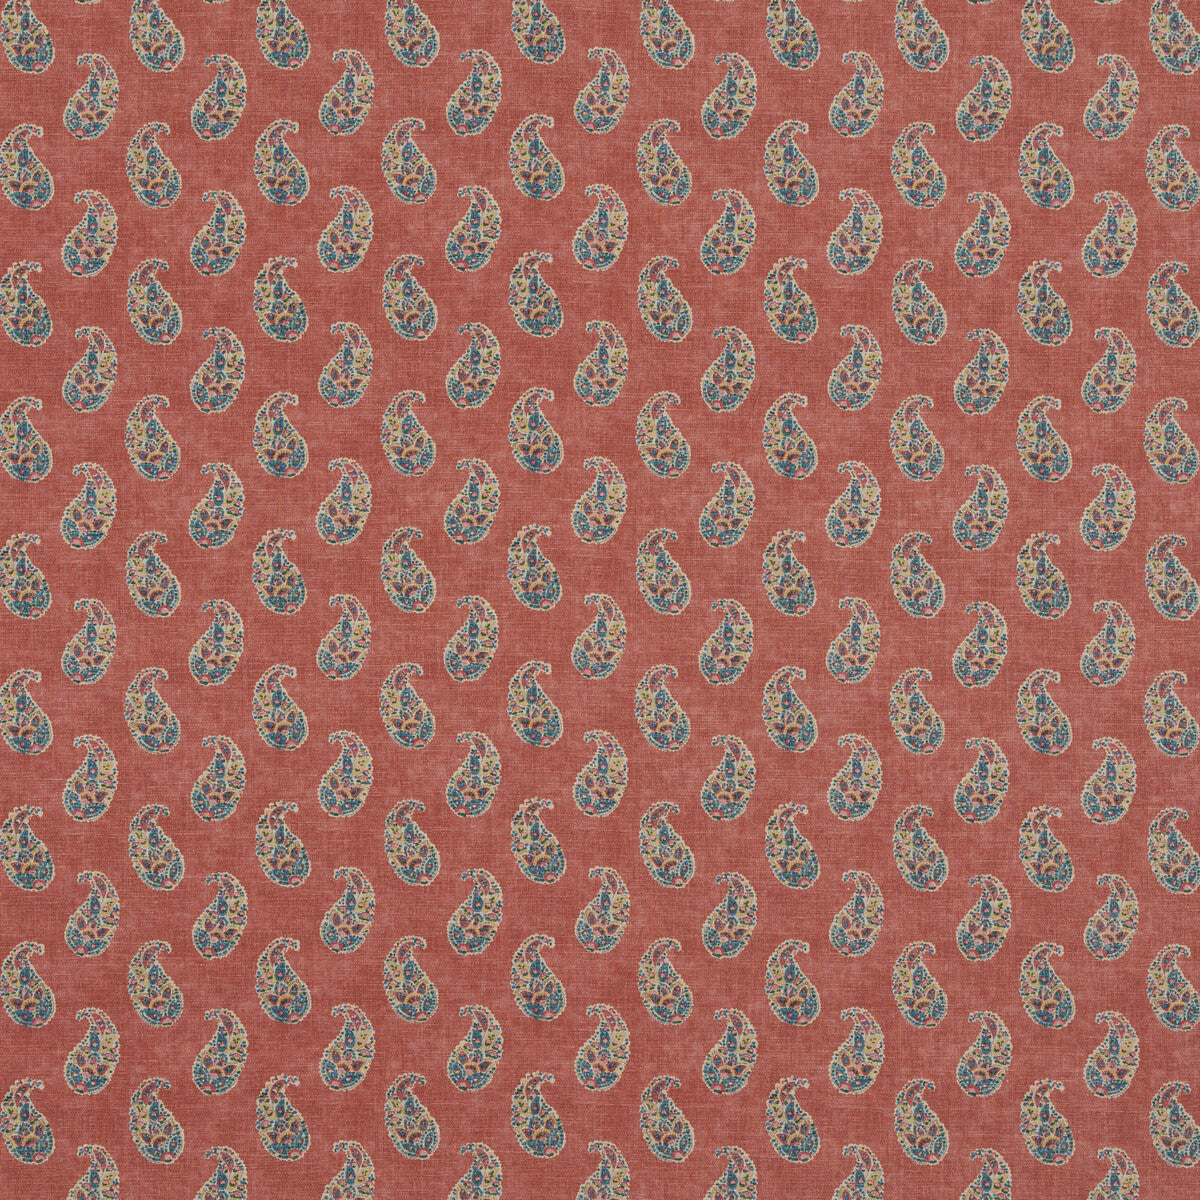 Patola Paisley fabric in red color - pattern BP10930.1.0 - by G P &amp; J Baker in the Caspian collection